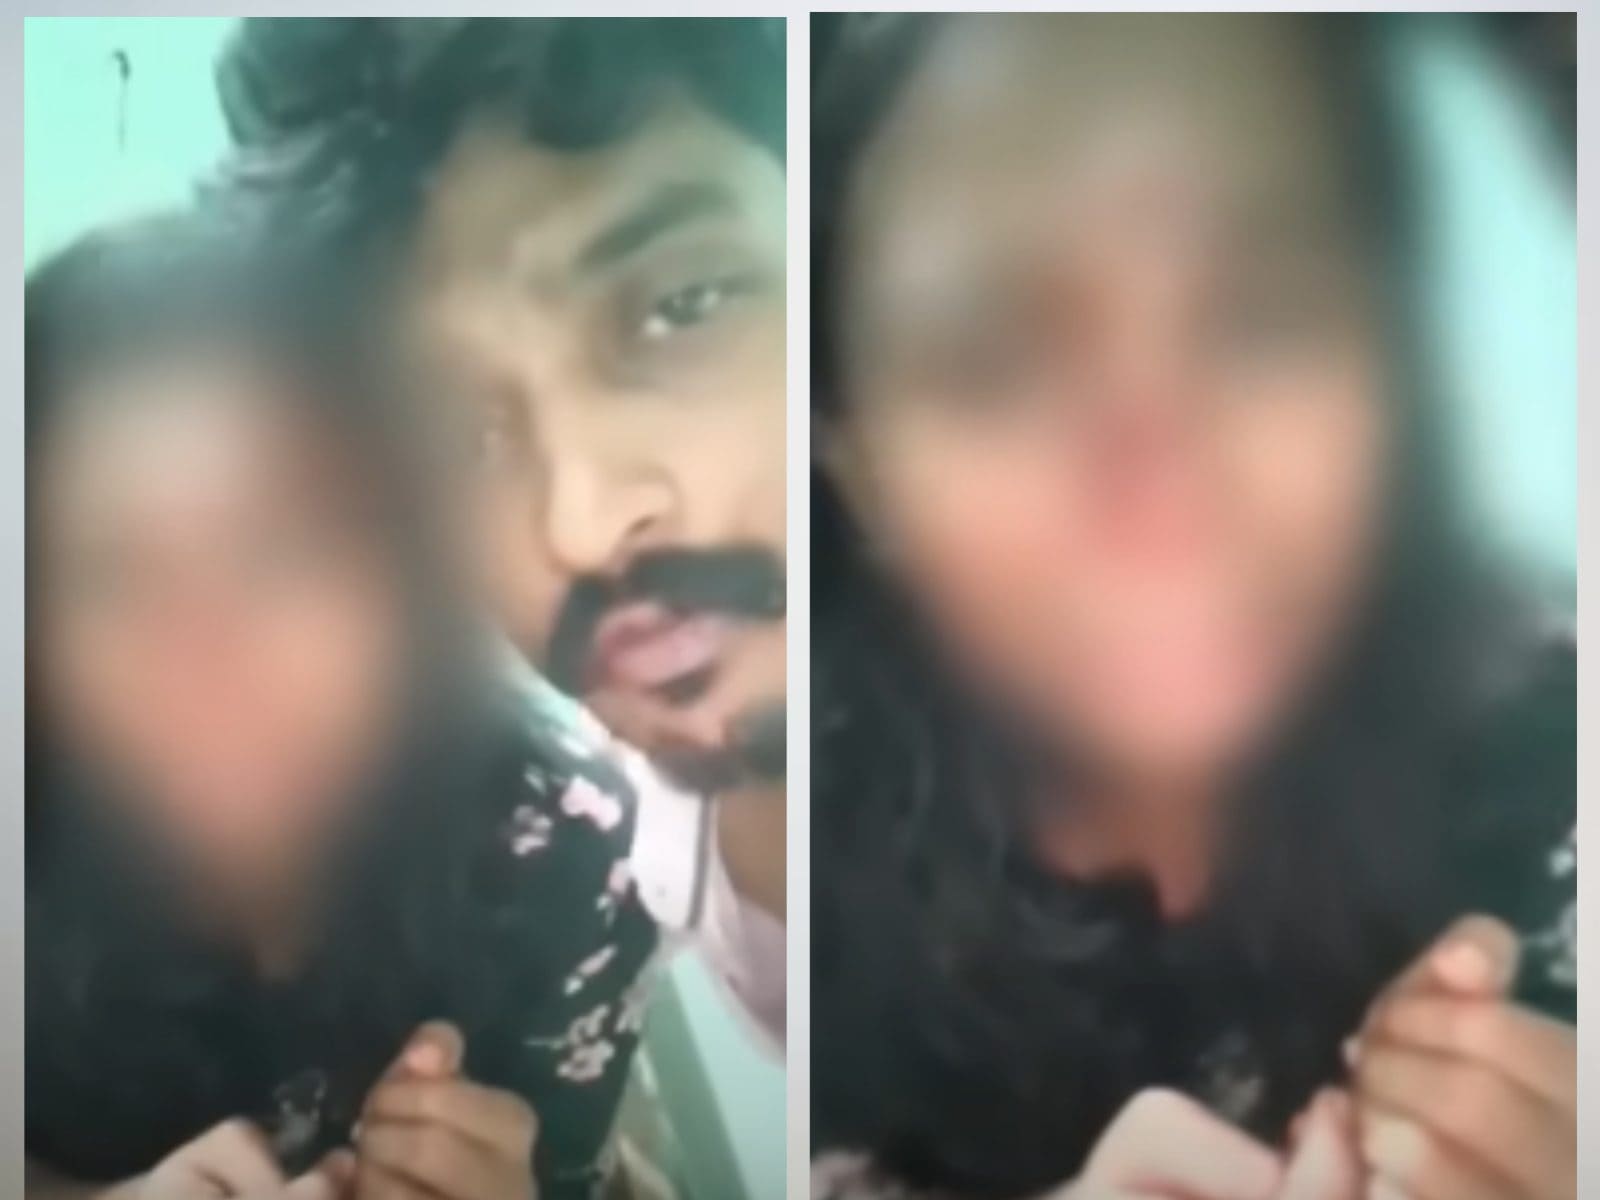 Kerala Man Thrashes Wife, Films Assault, Shares Video With Friends image photo